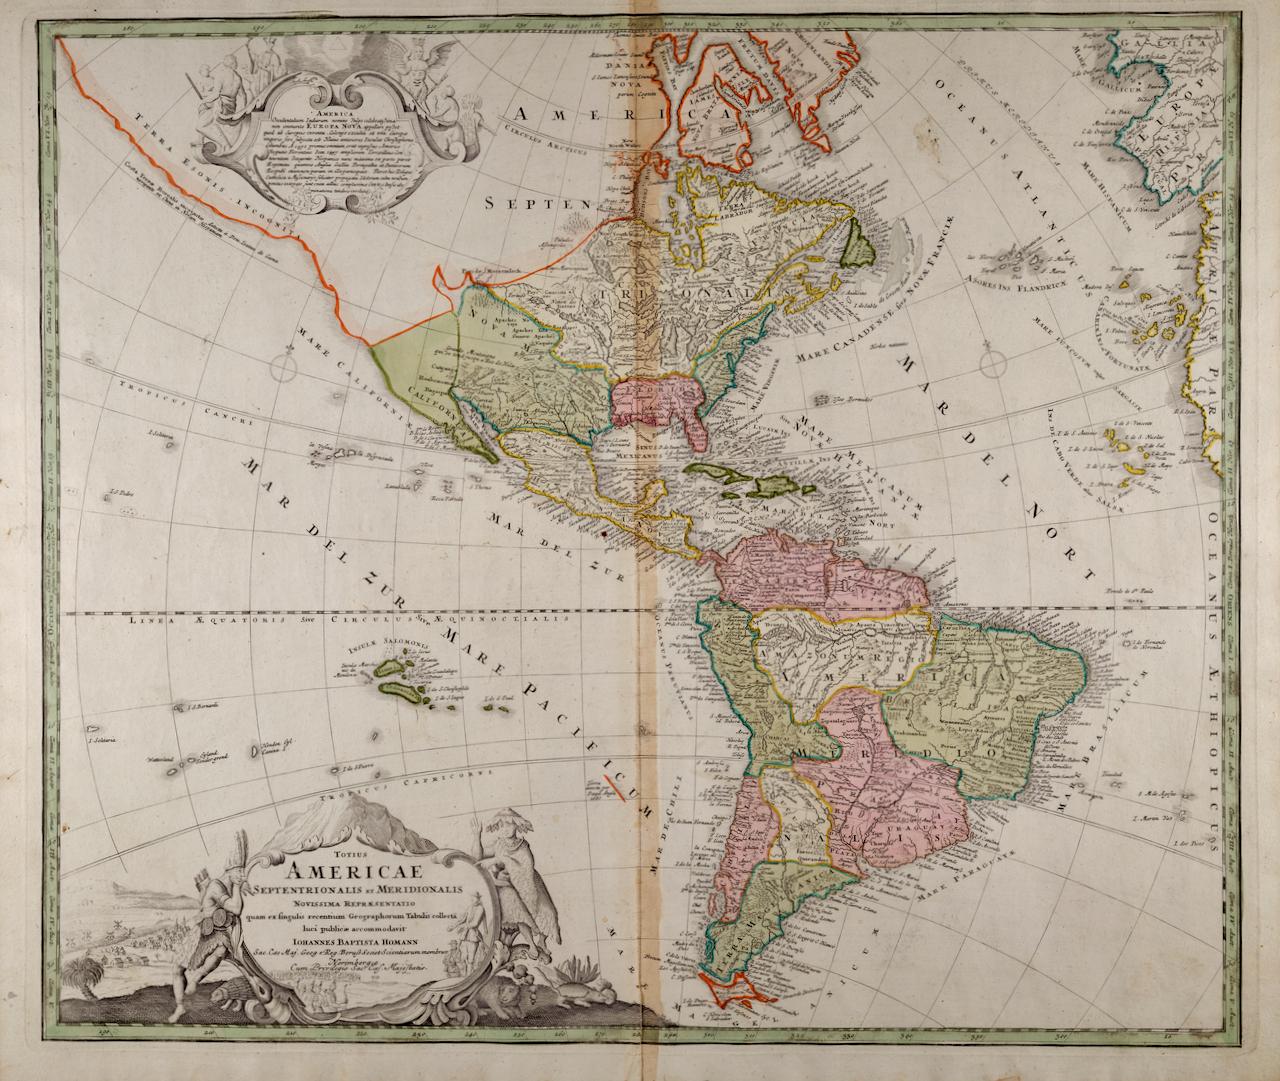 North and South America: An 18th Century Hand-colored Map by Johann Homann